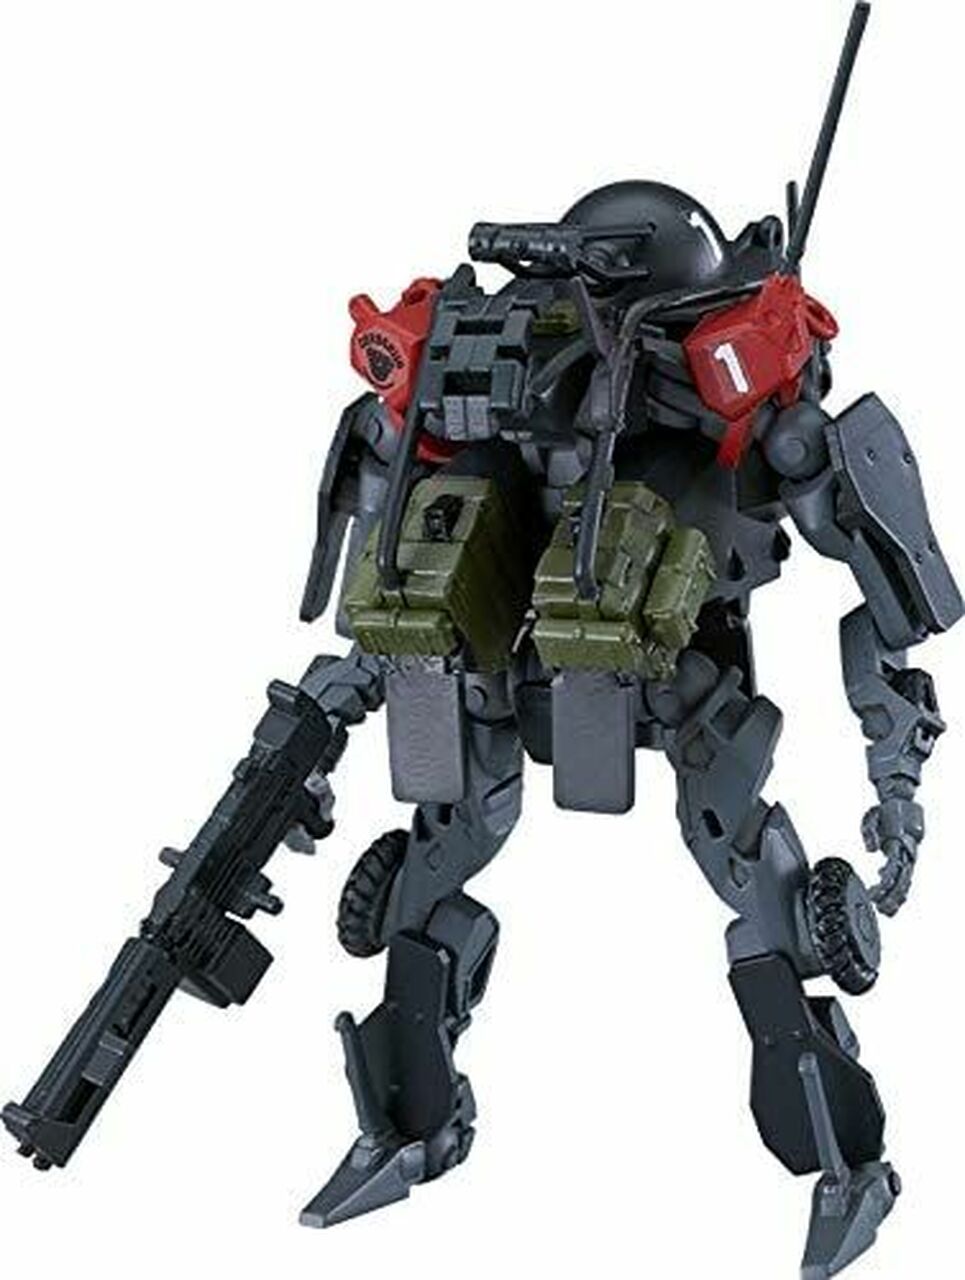 Moderoid: Obsolete Series PMC Cerberus Security Services Exoframe 1/35 Scale 